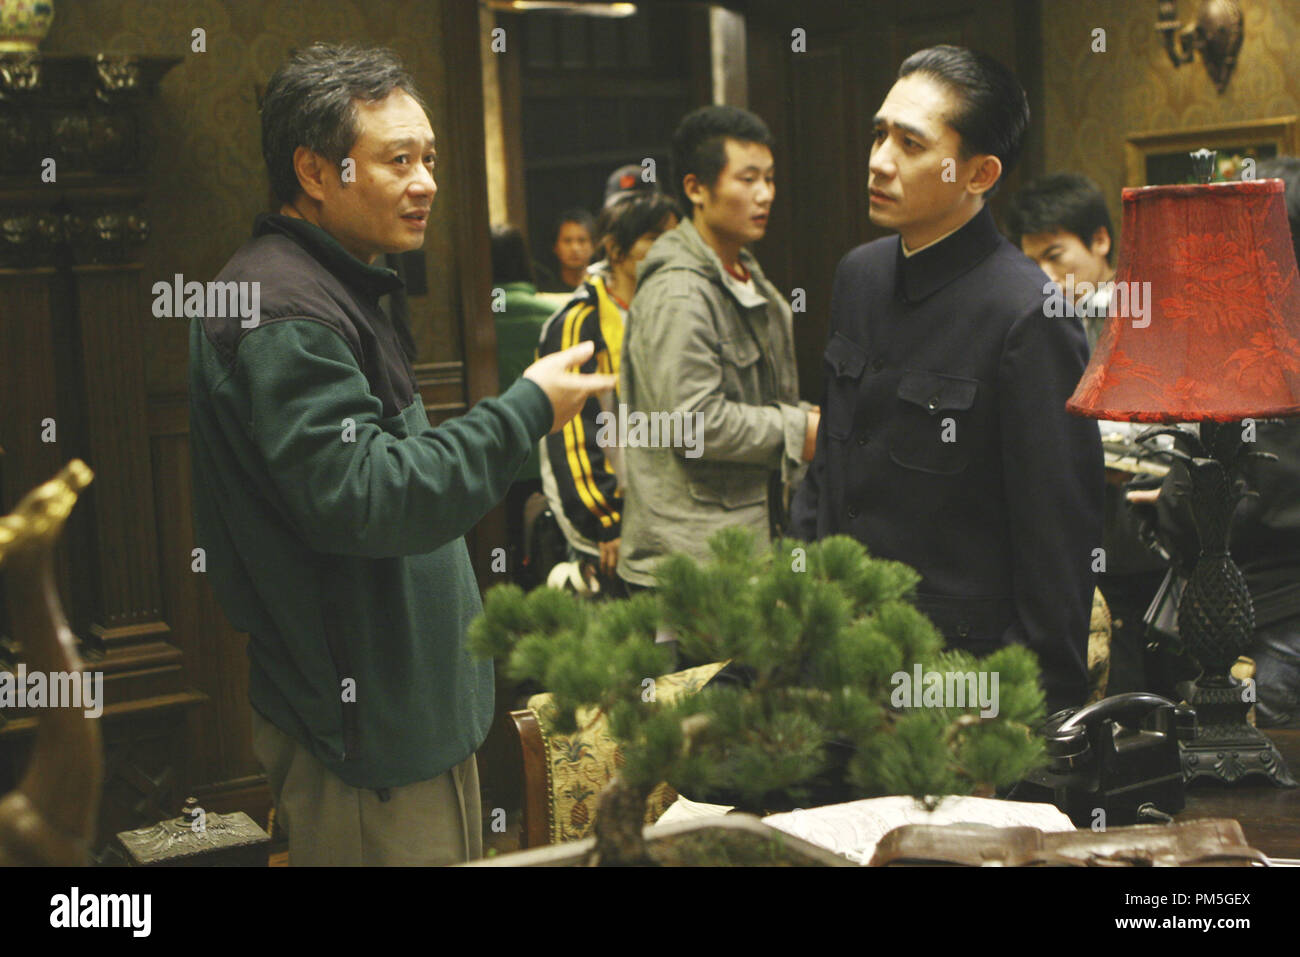 Film Still from 'Lust, Caution' (aka 'Se, jie') Director Ang Lee, Tony Leung Chiu Wai © 2007 Focus Features Photo credit: Chan Kam Chuen   File Reference # 30738239THA  For Editorial Use Only -  All Rights Reserved Stock Photo